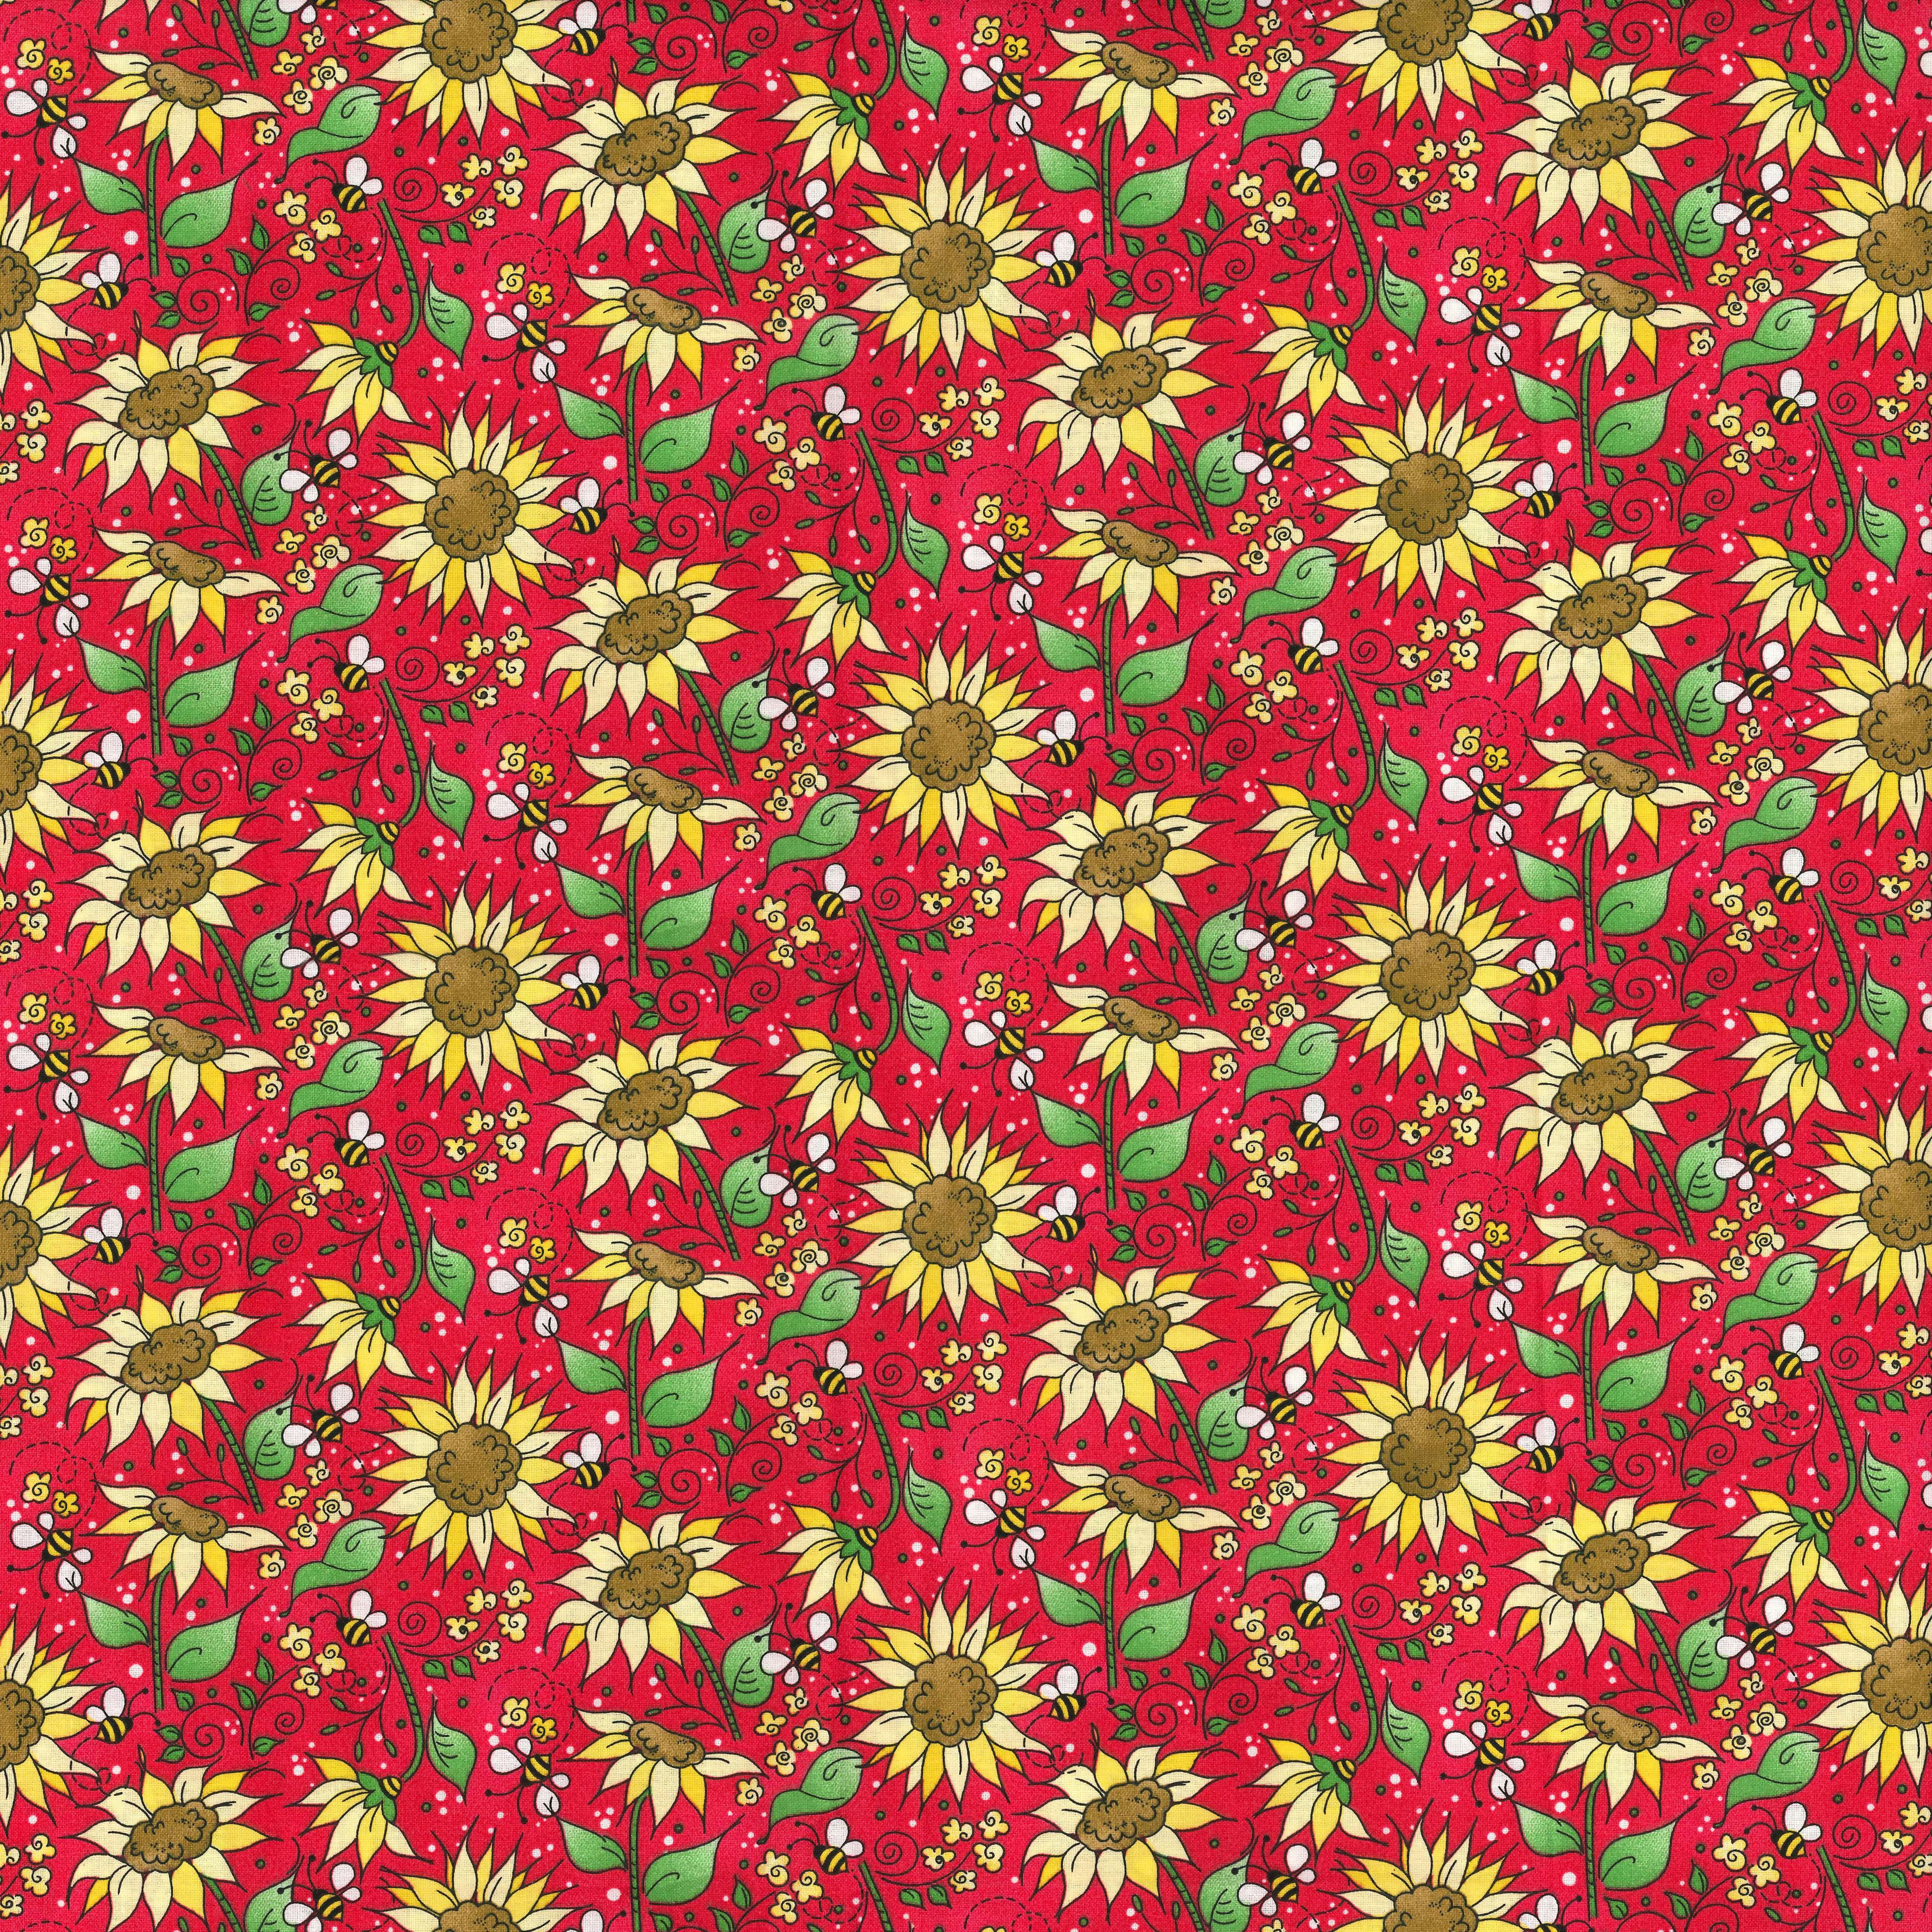 Fabric Traditions Red Sunflowers Cotton Fabric